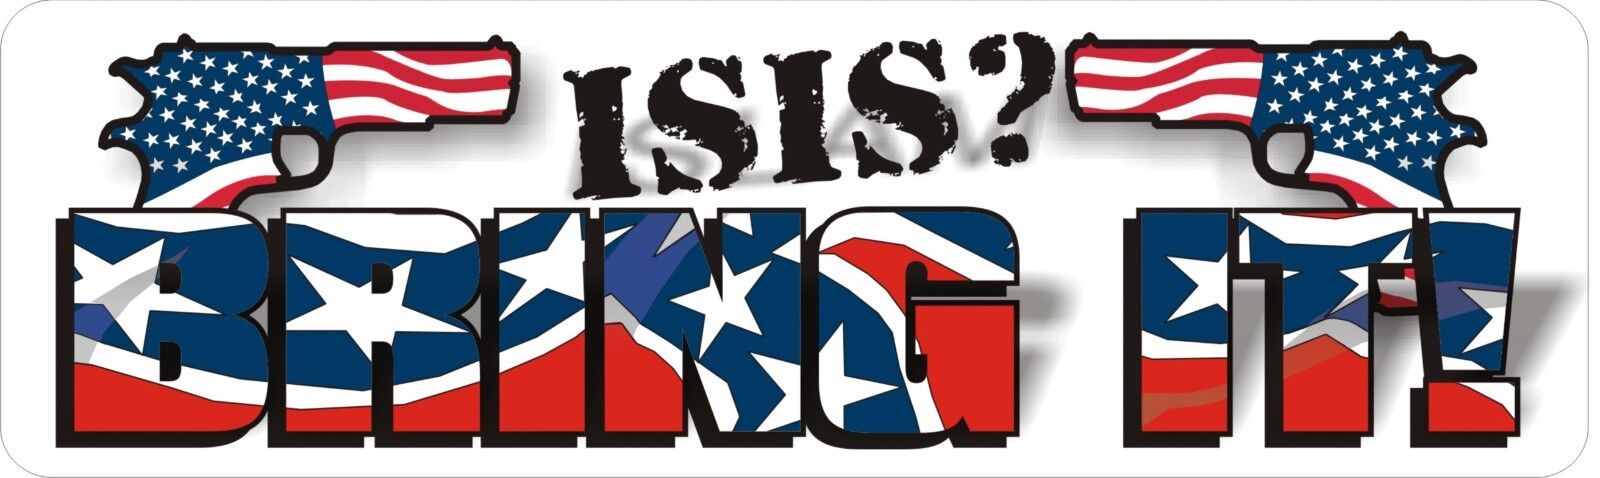 ISIS American Flag Pattern Decal--Depictions Are Not Glock, Colt or S&W